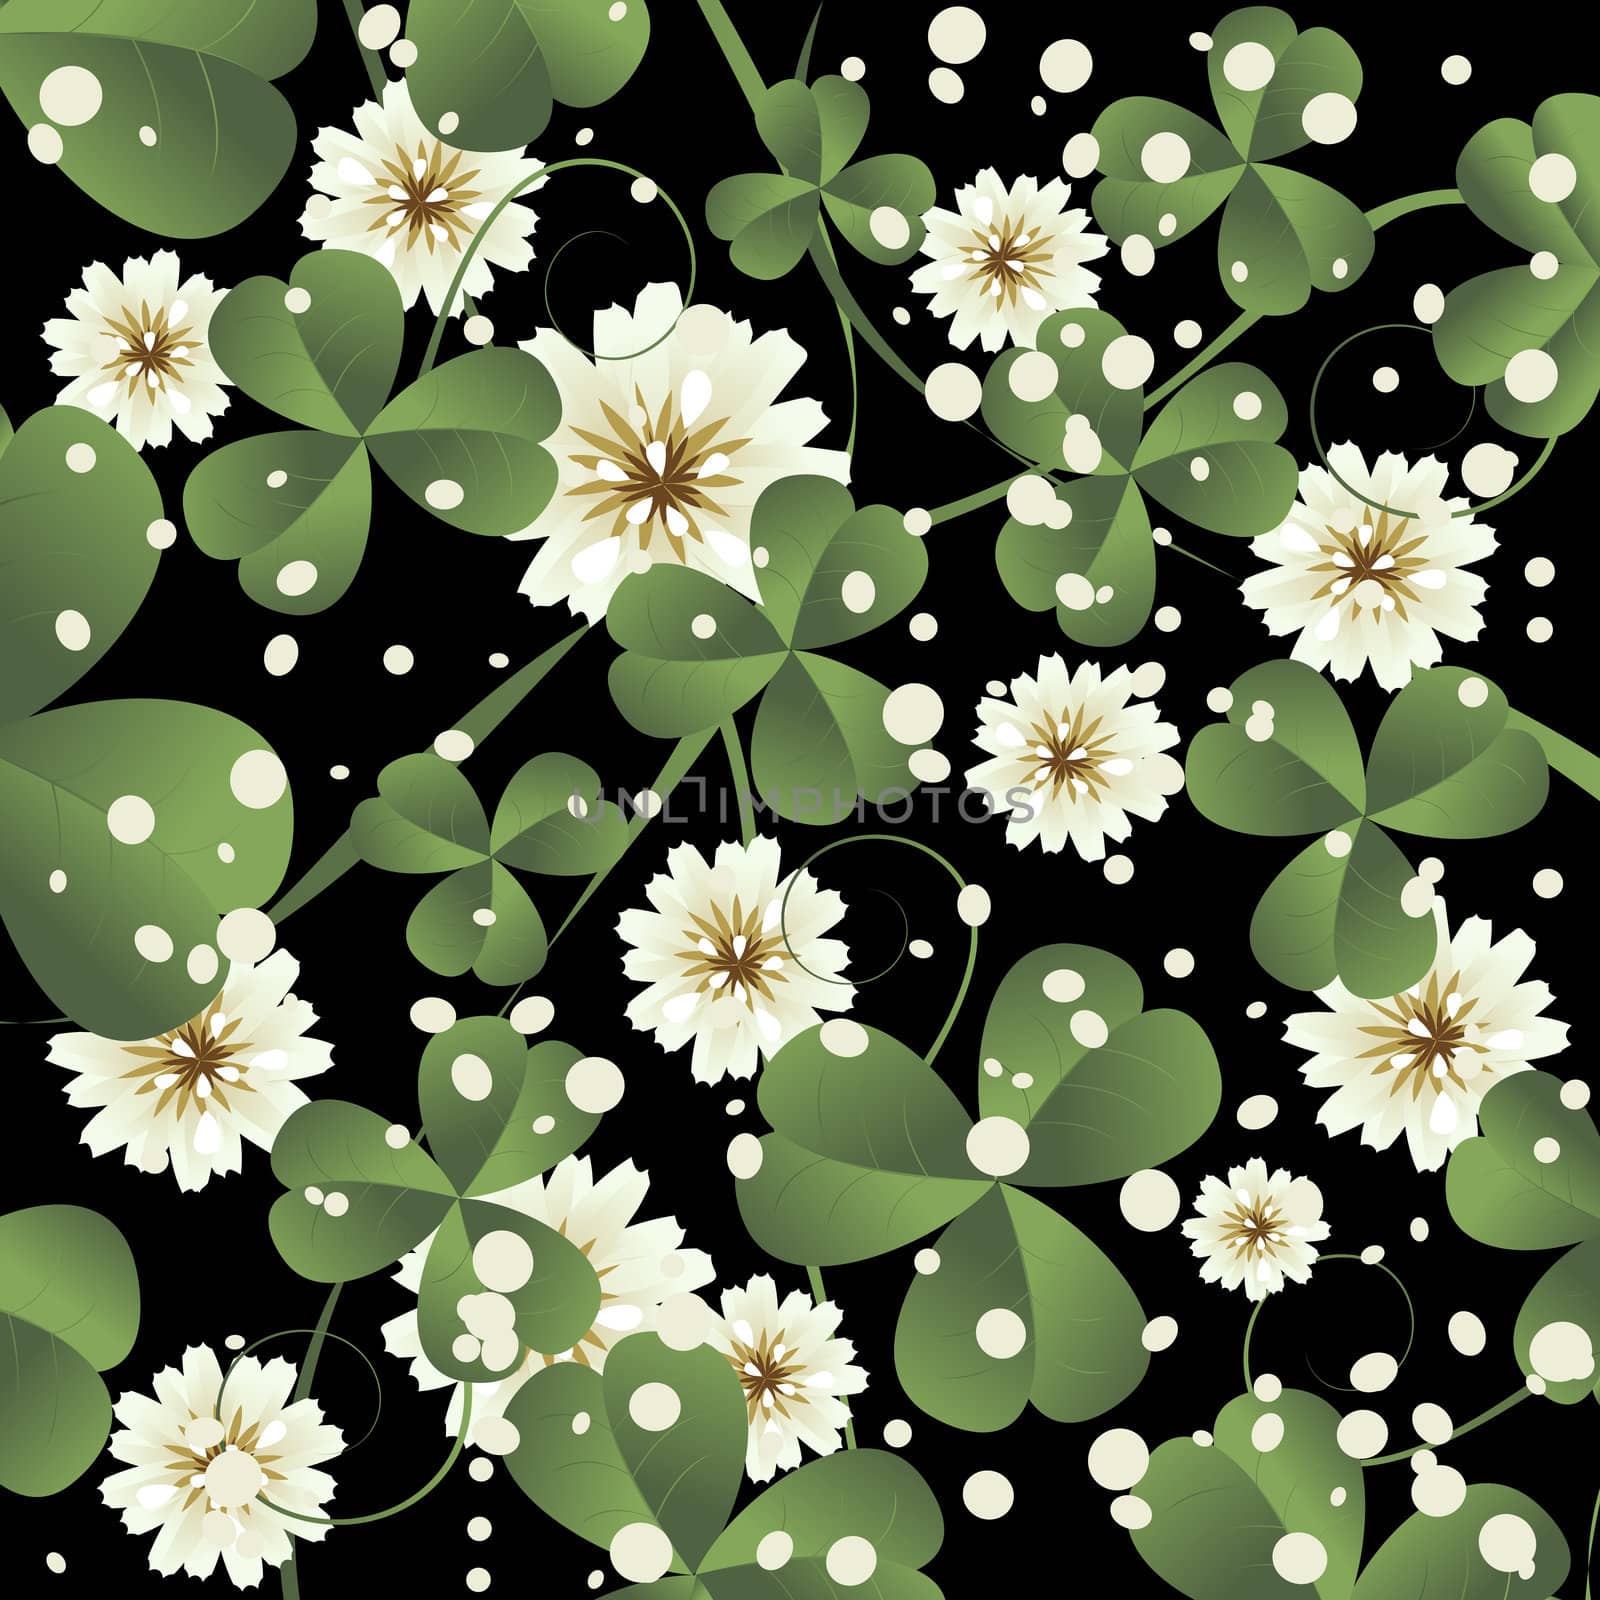 Clover leaves background by Lirch